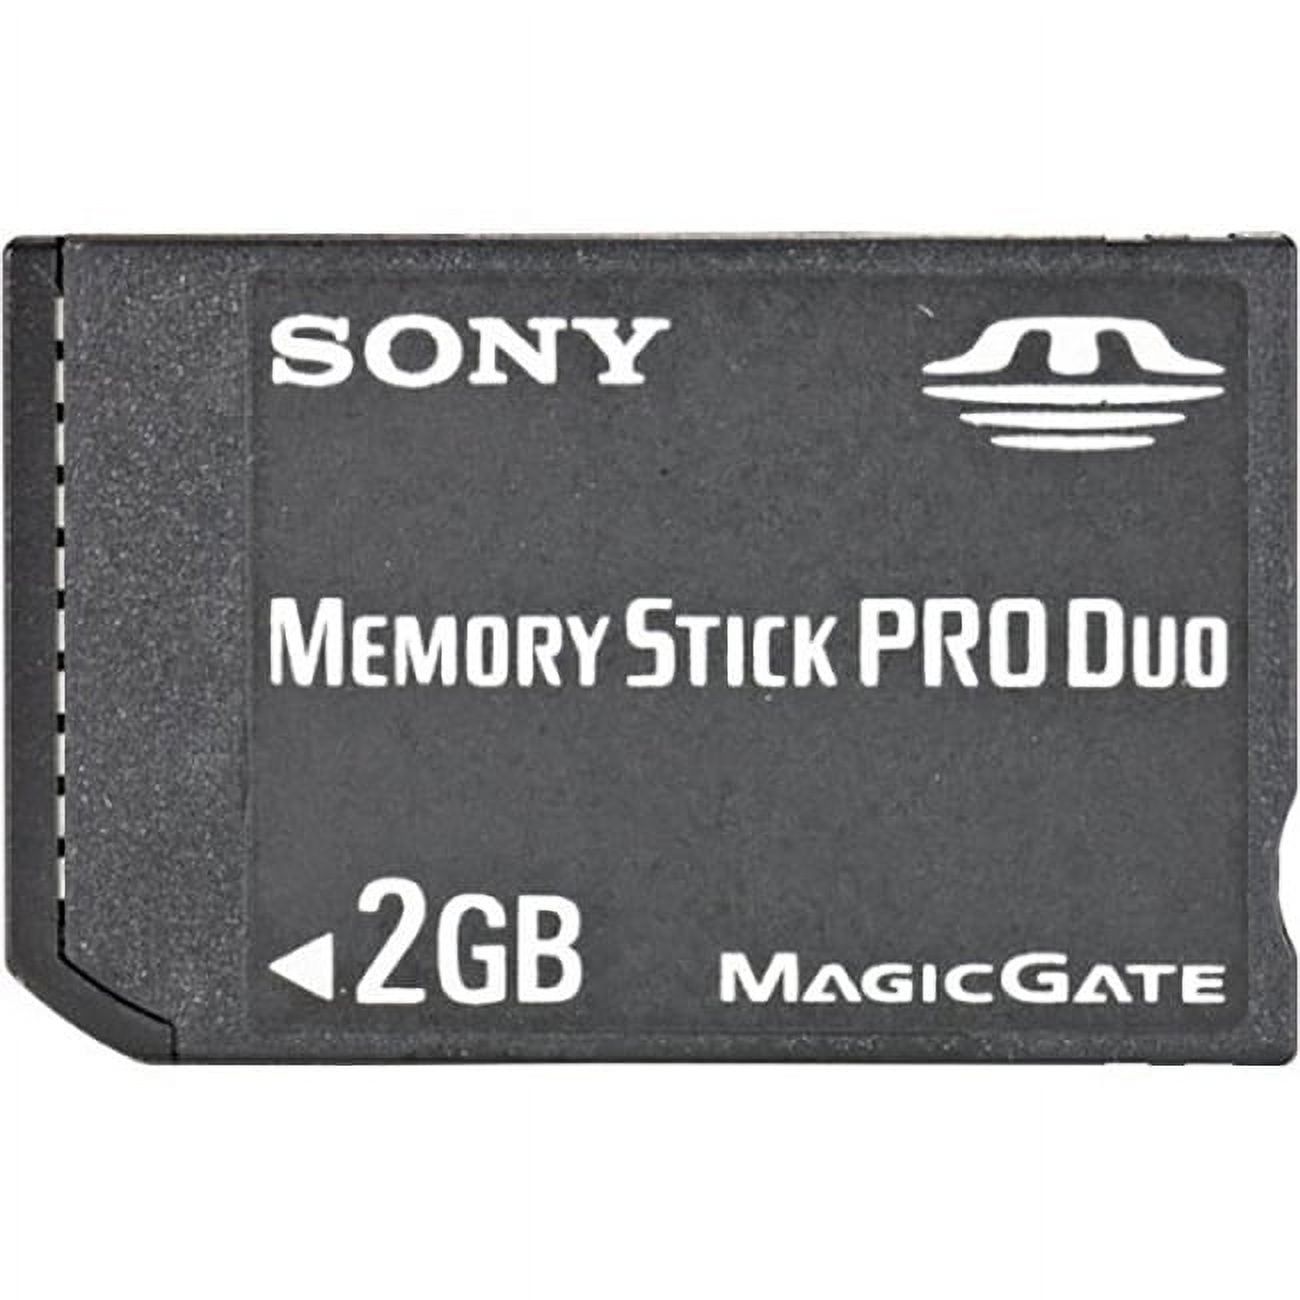 Used Sony 2 GB Memory Stick Pro Duo Memory Card 